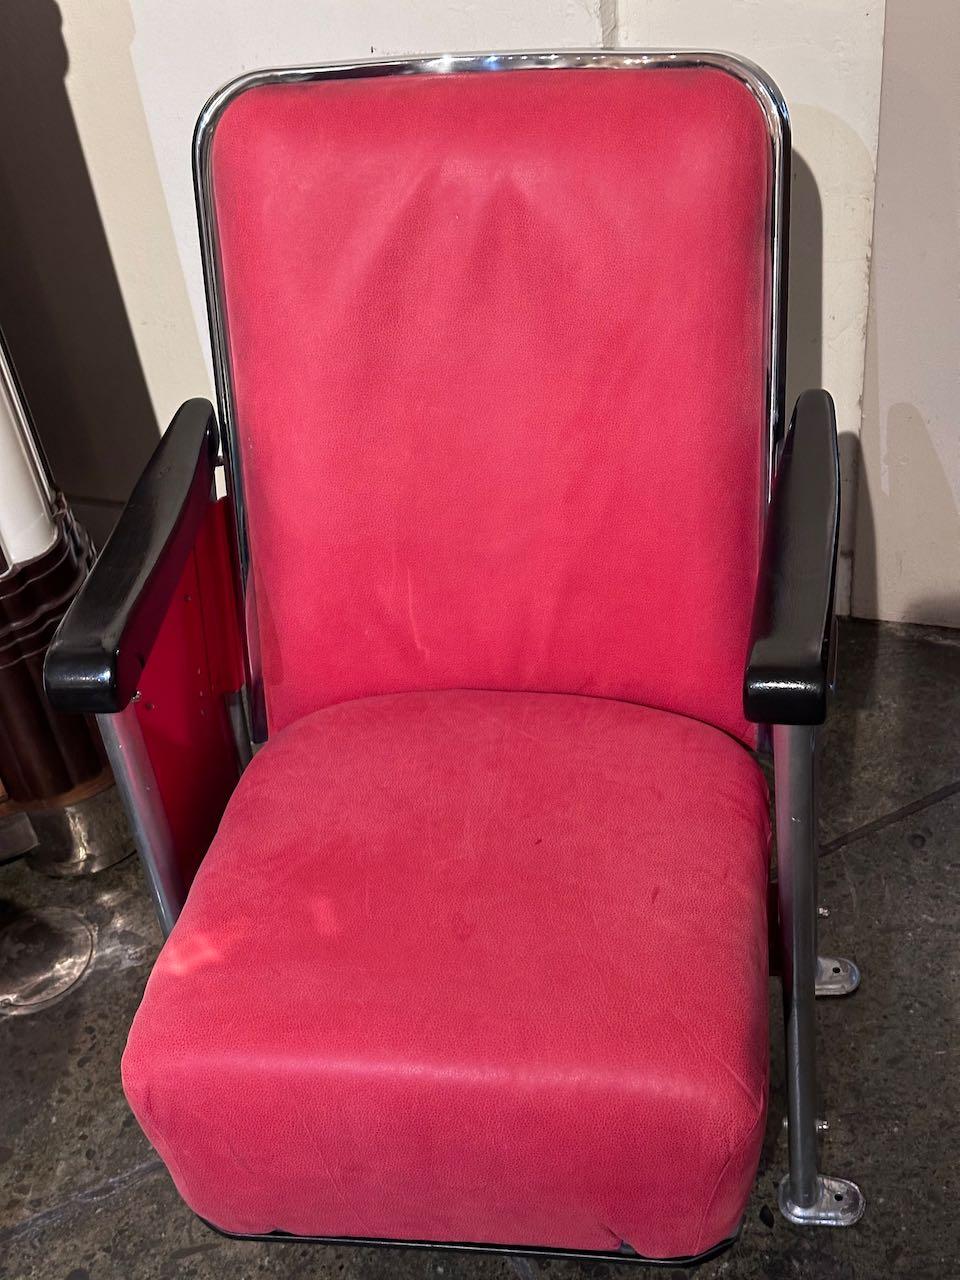 American Restored Art Deco Movie Theater Seats Pair For Sale